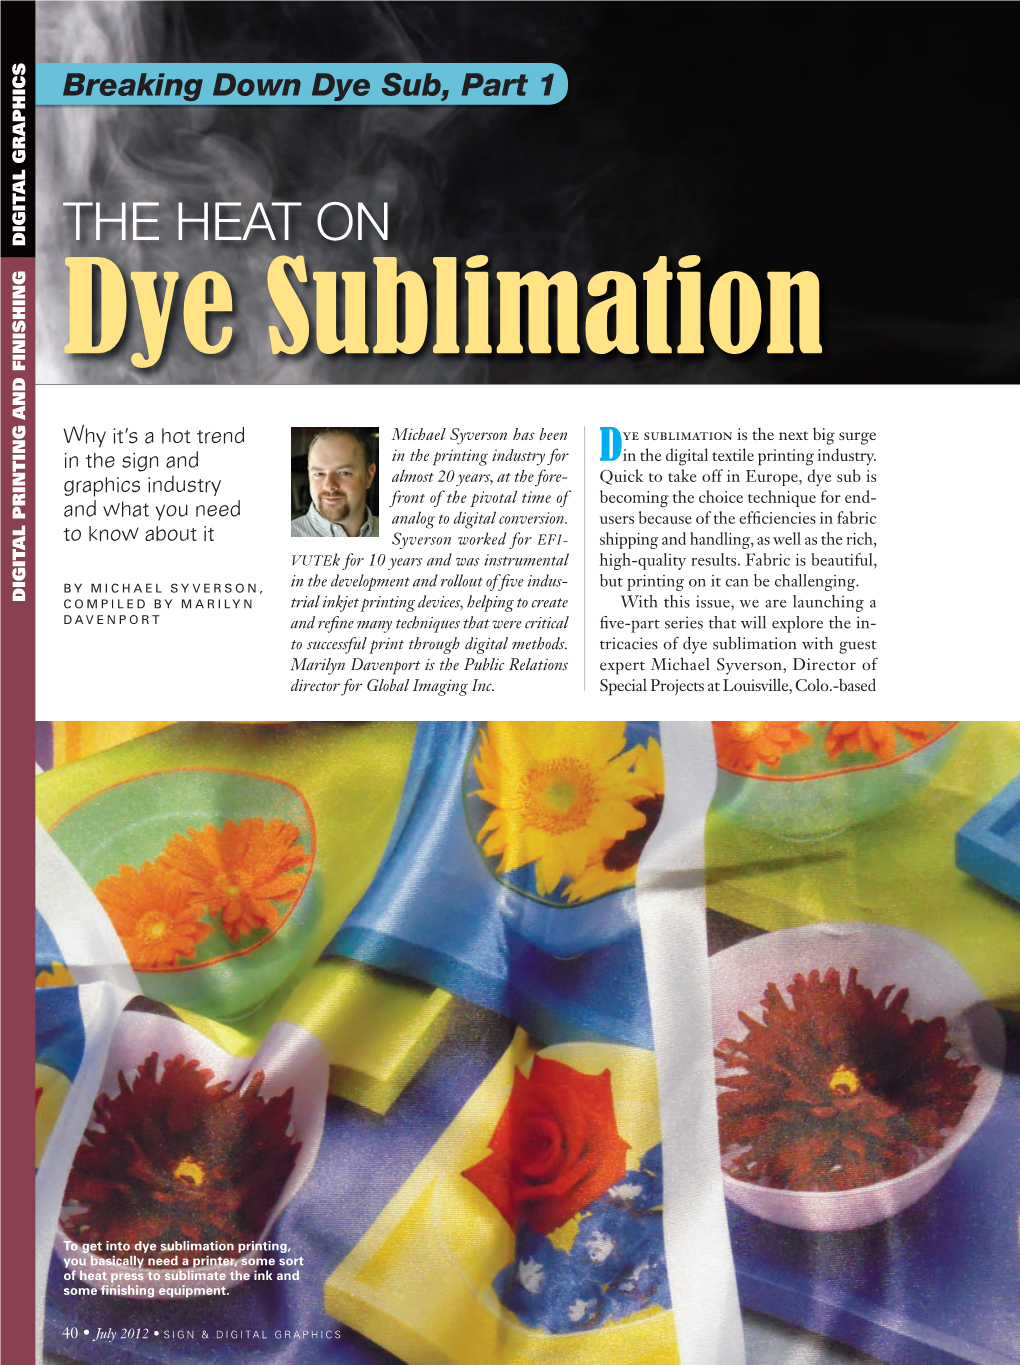 THE HEAT on Dye Sublimation